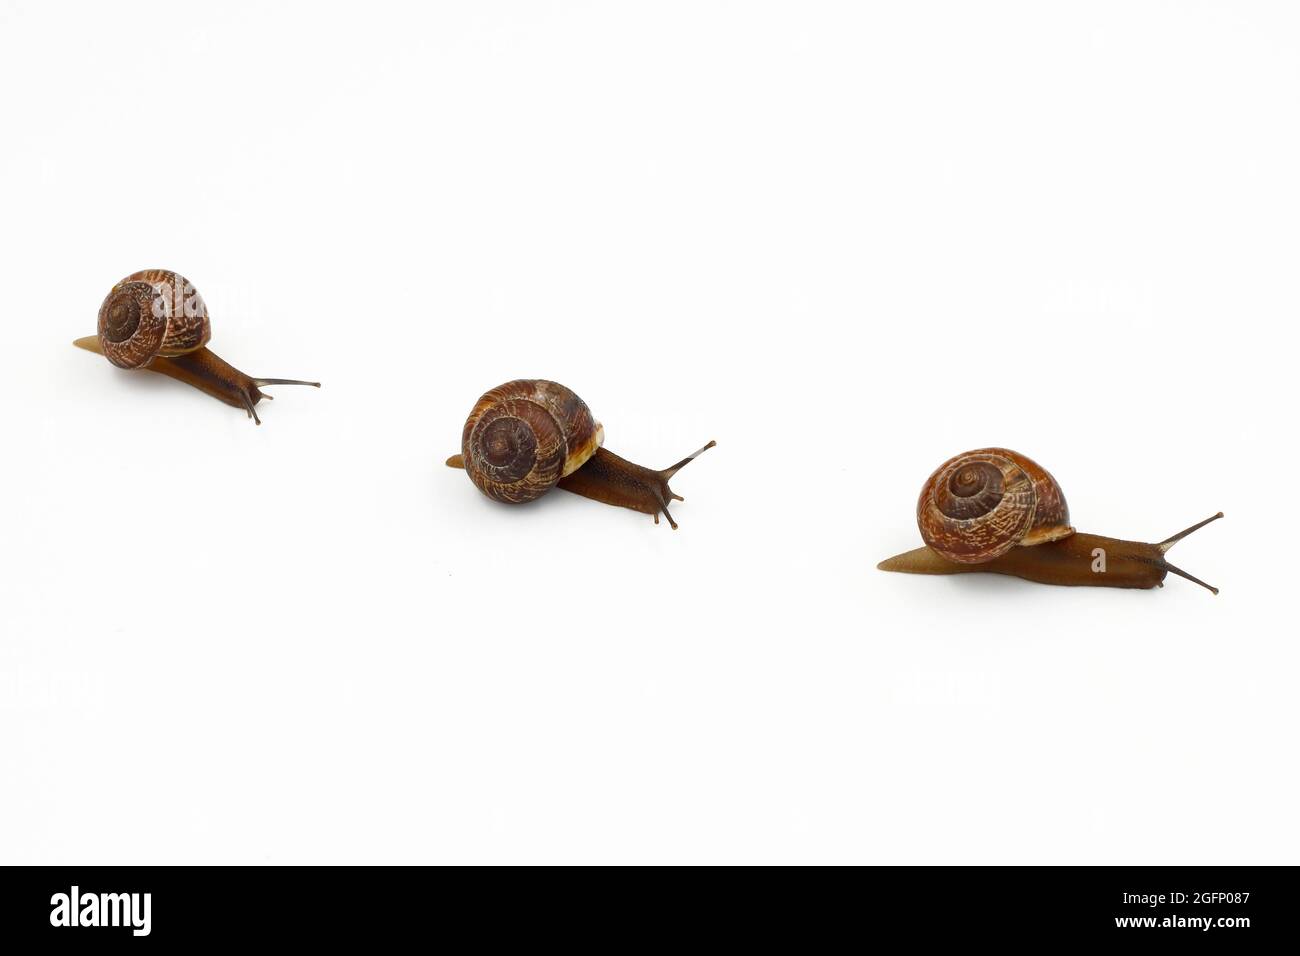 A group of snails on a white background, crawling in one line, side view. Stock Photo